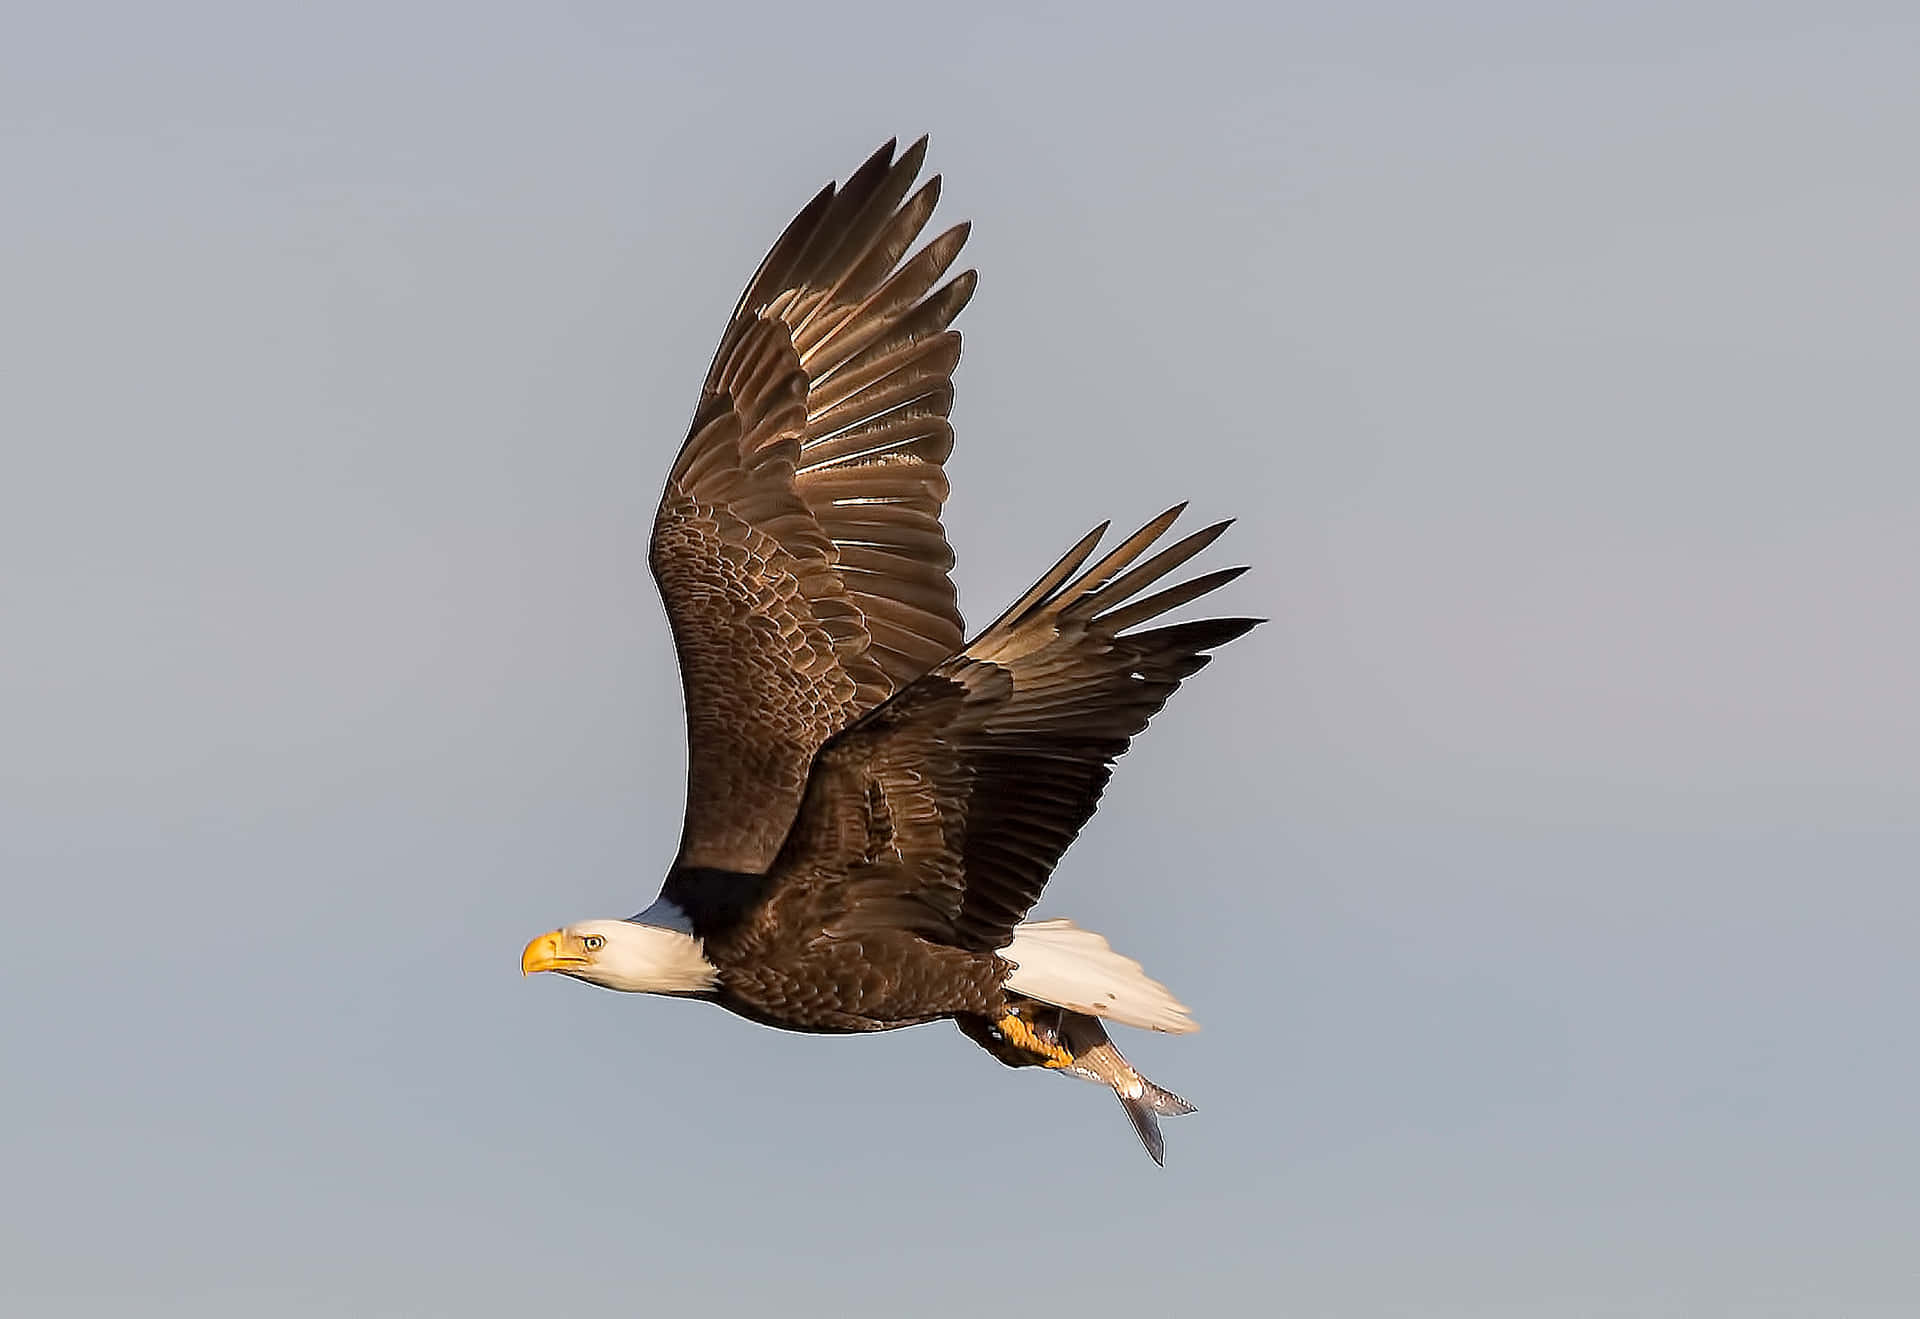 A Bald Eagle Flies Through The Air With A Fish In Its Mouth Wallpaper